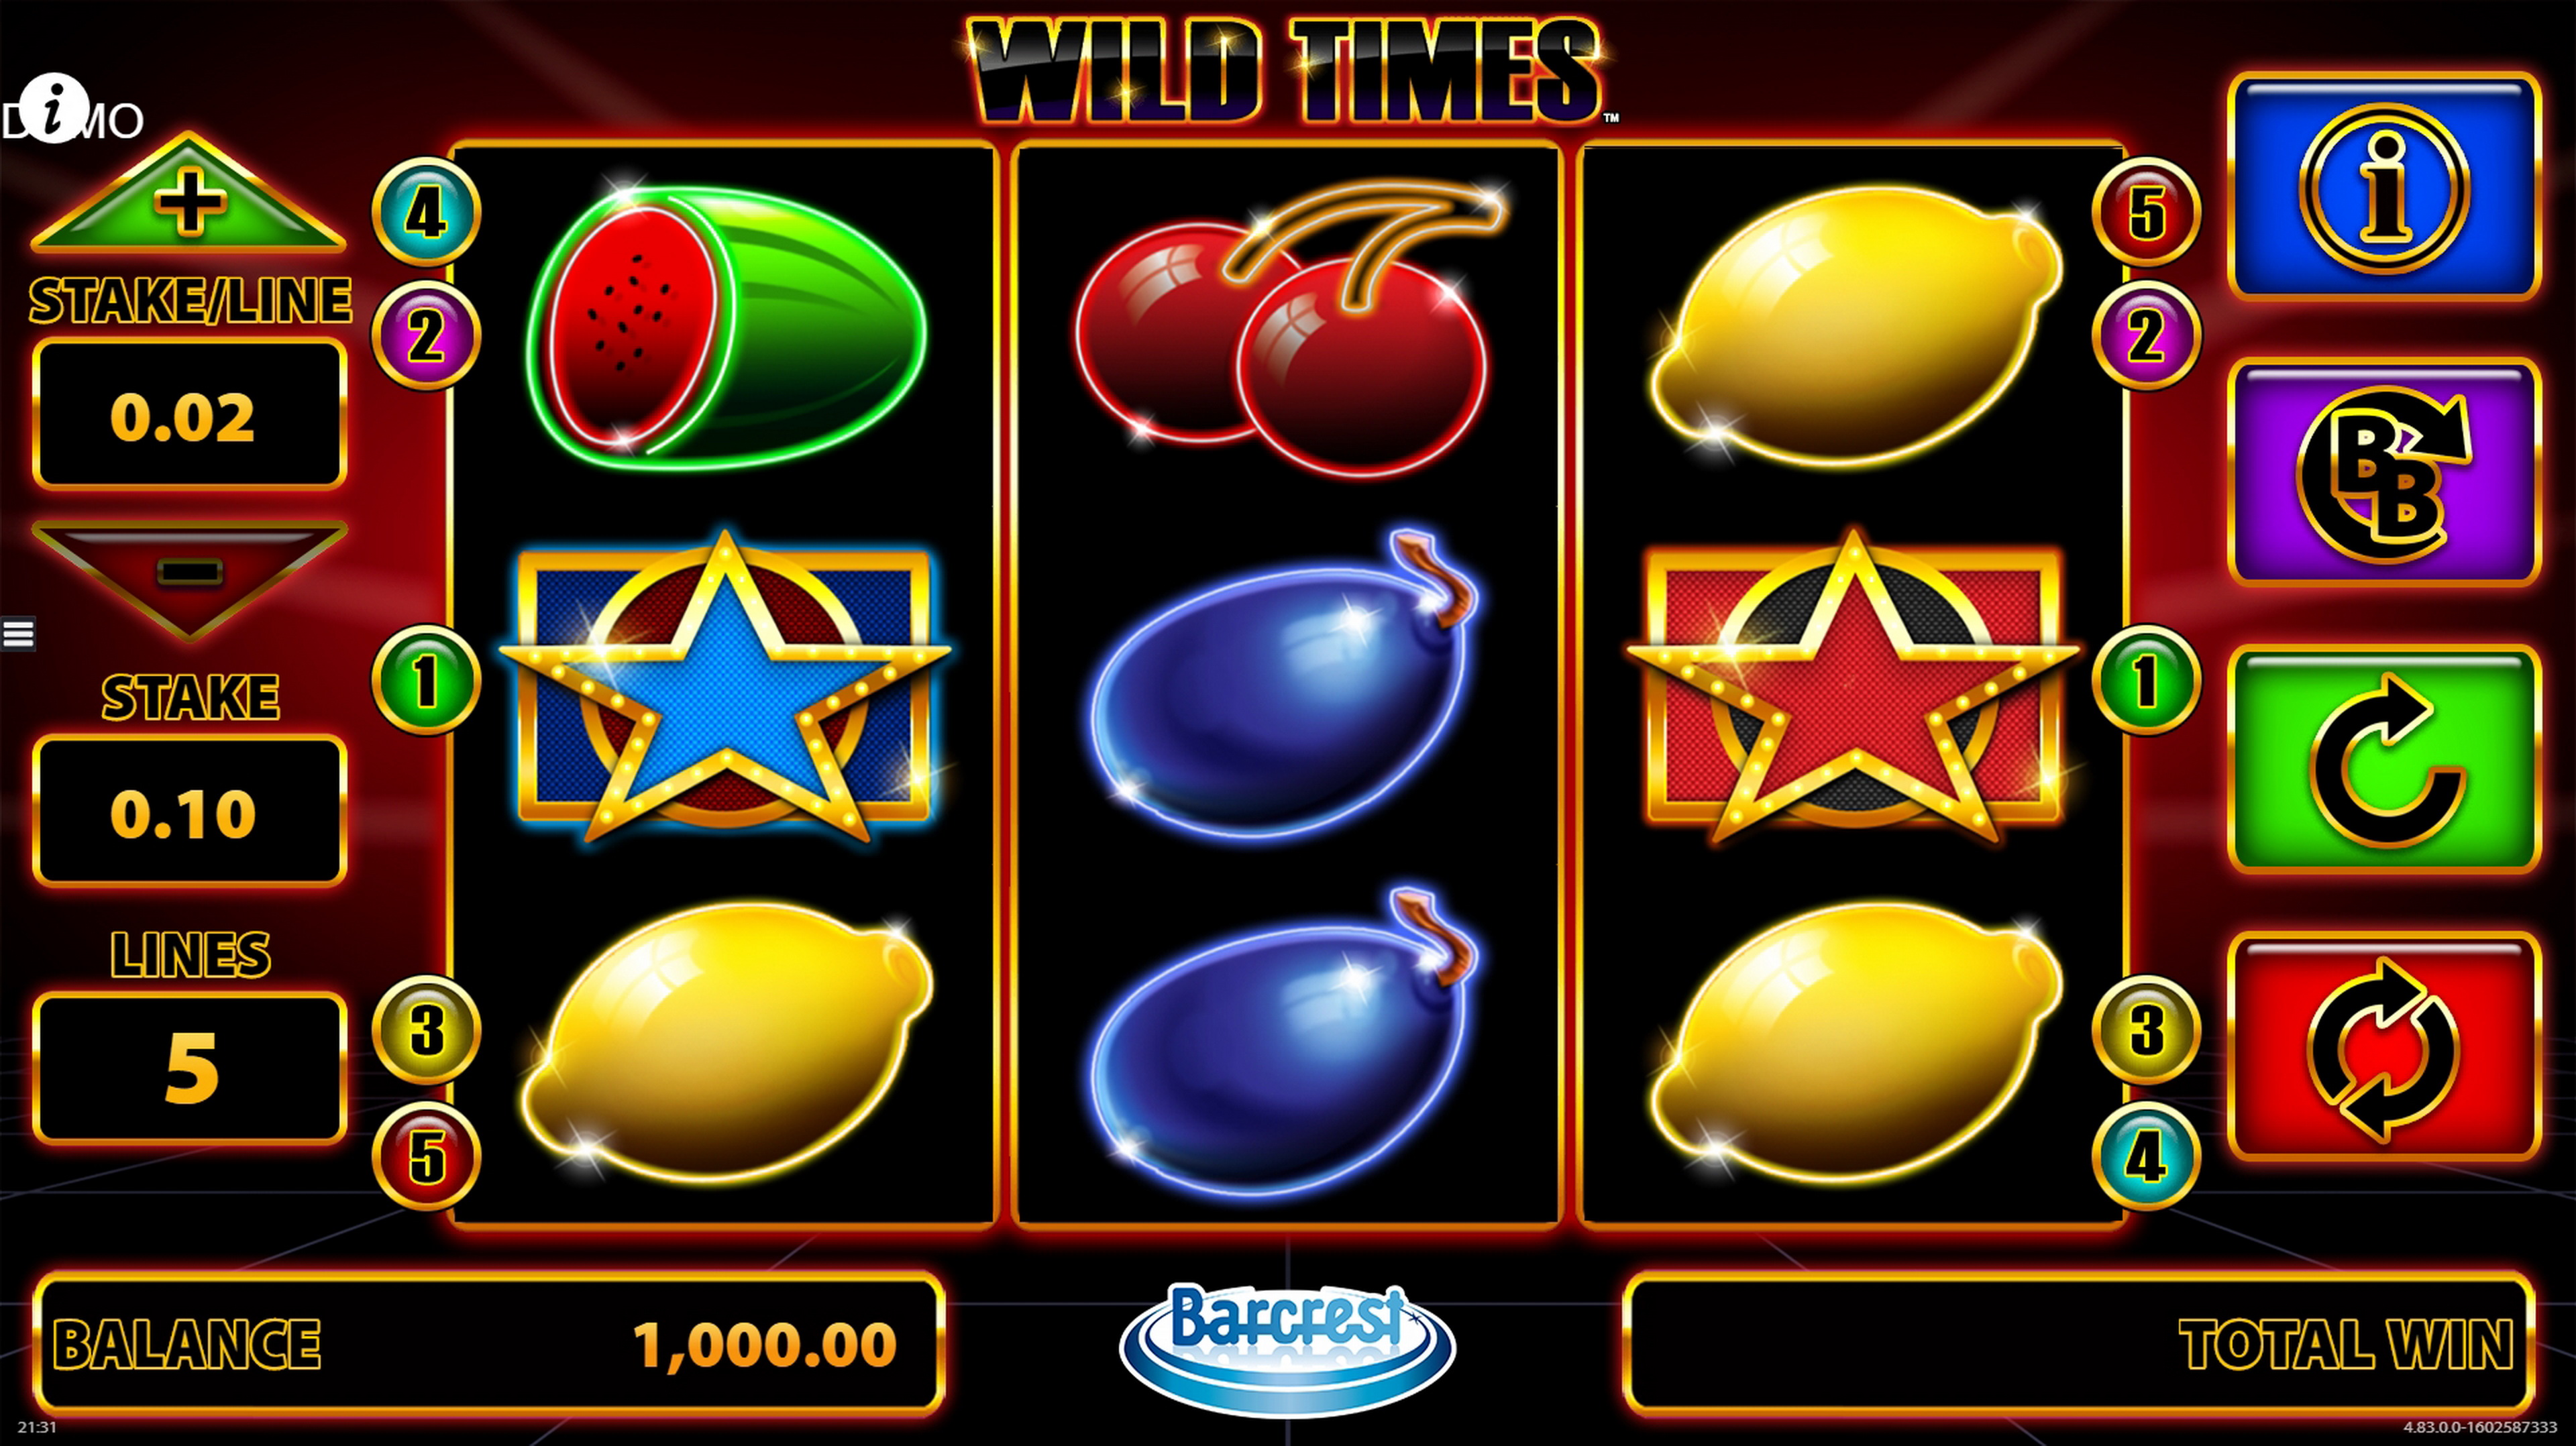 Reels in Wild Times Slot Game by Barcrest Games